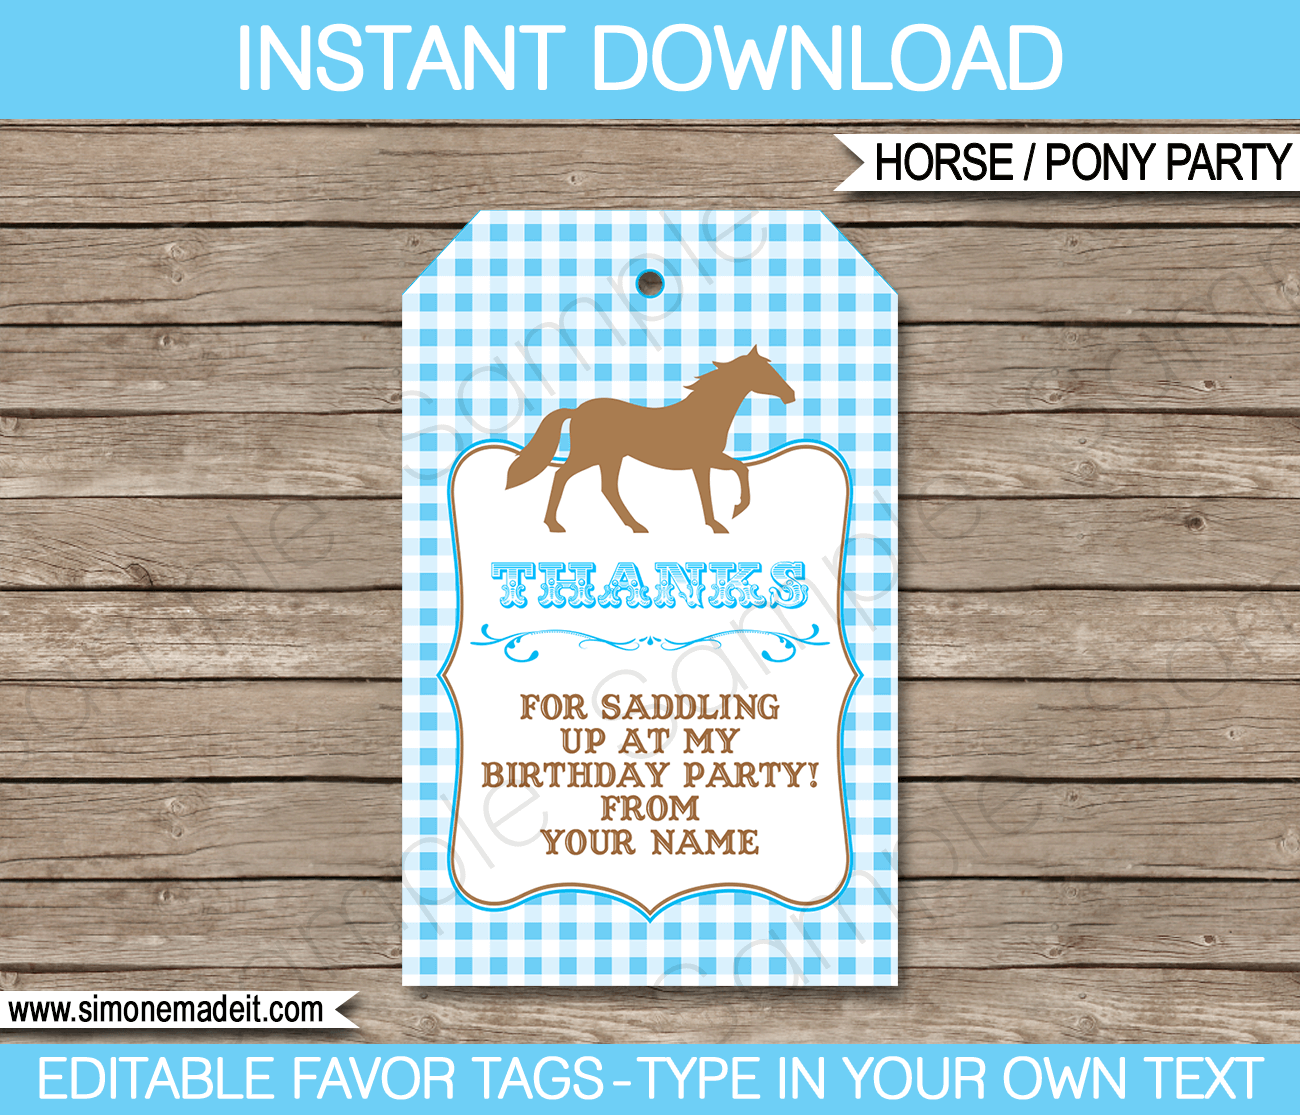 Pony or Horse Birthday Party Favor Tags | Thank You Tags | Editable and Printable DIY Template | $3.00 INSTANT DOWNLOAD via simonemadeit.com